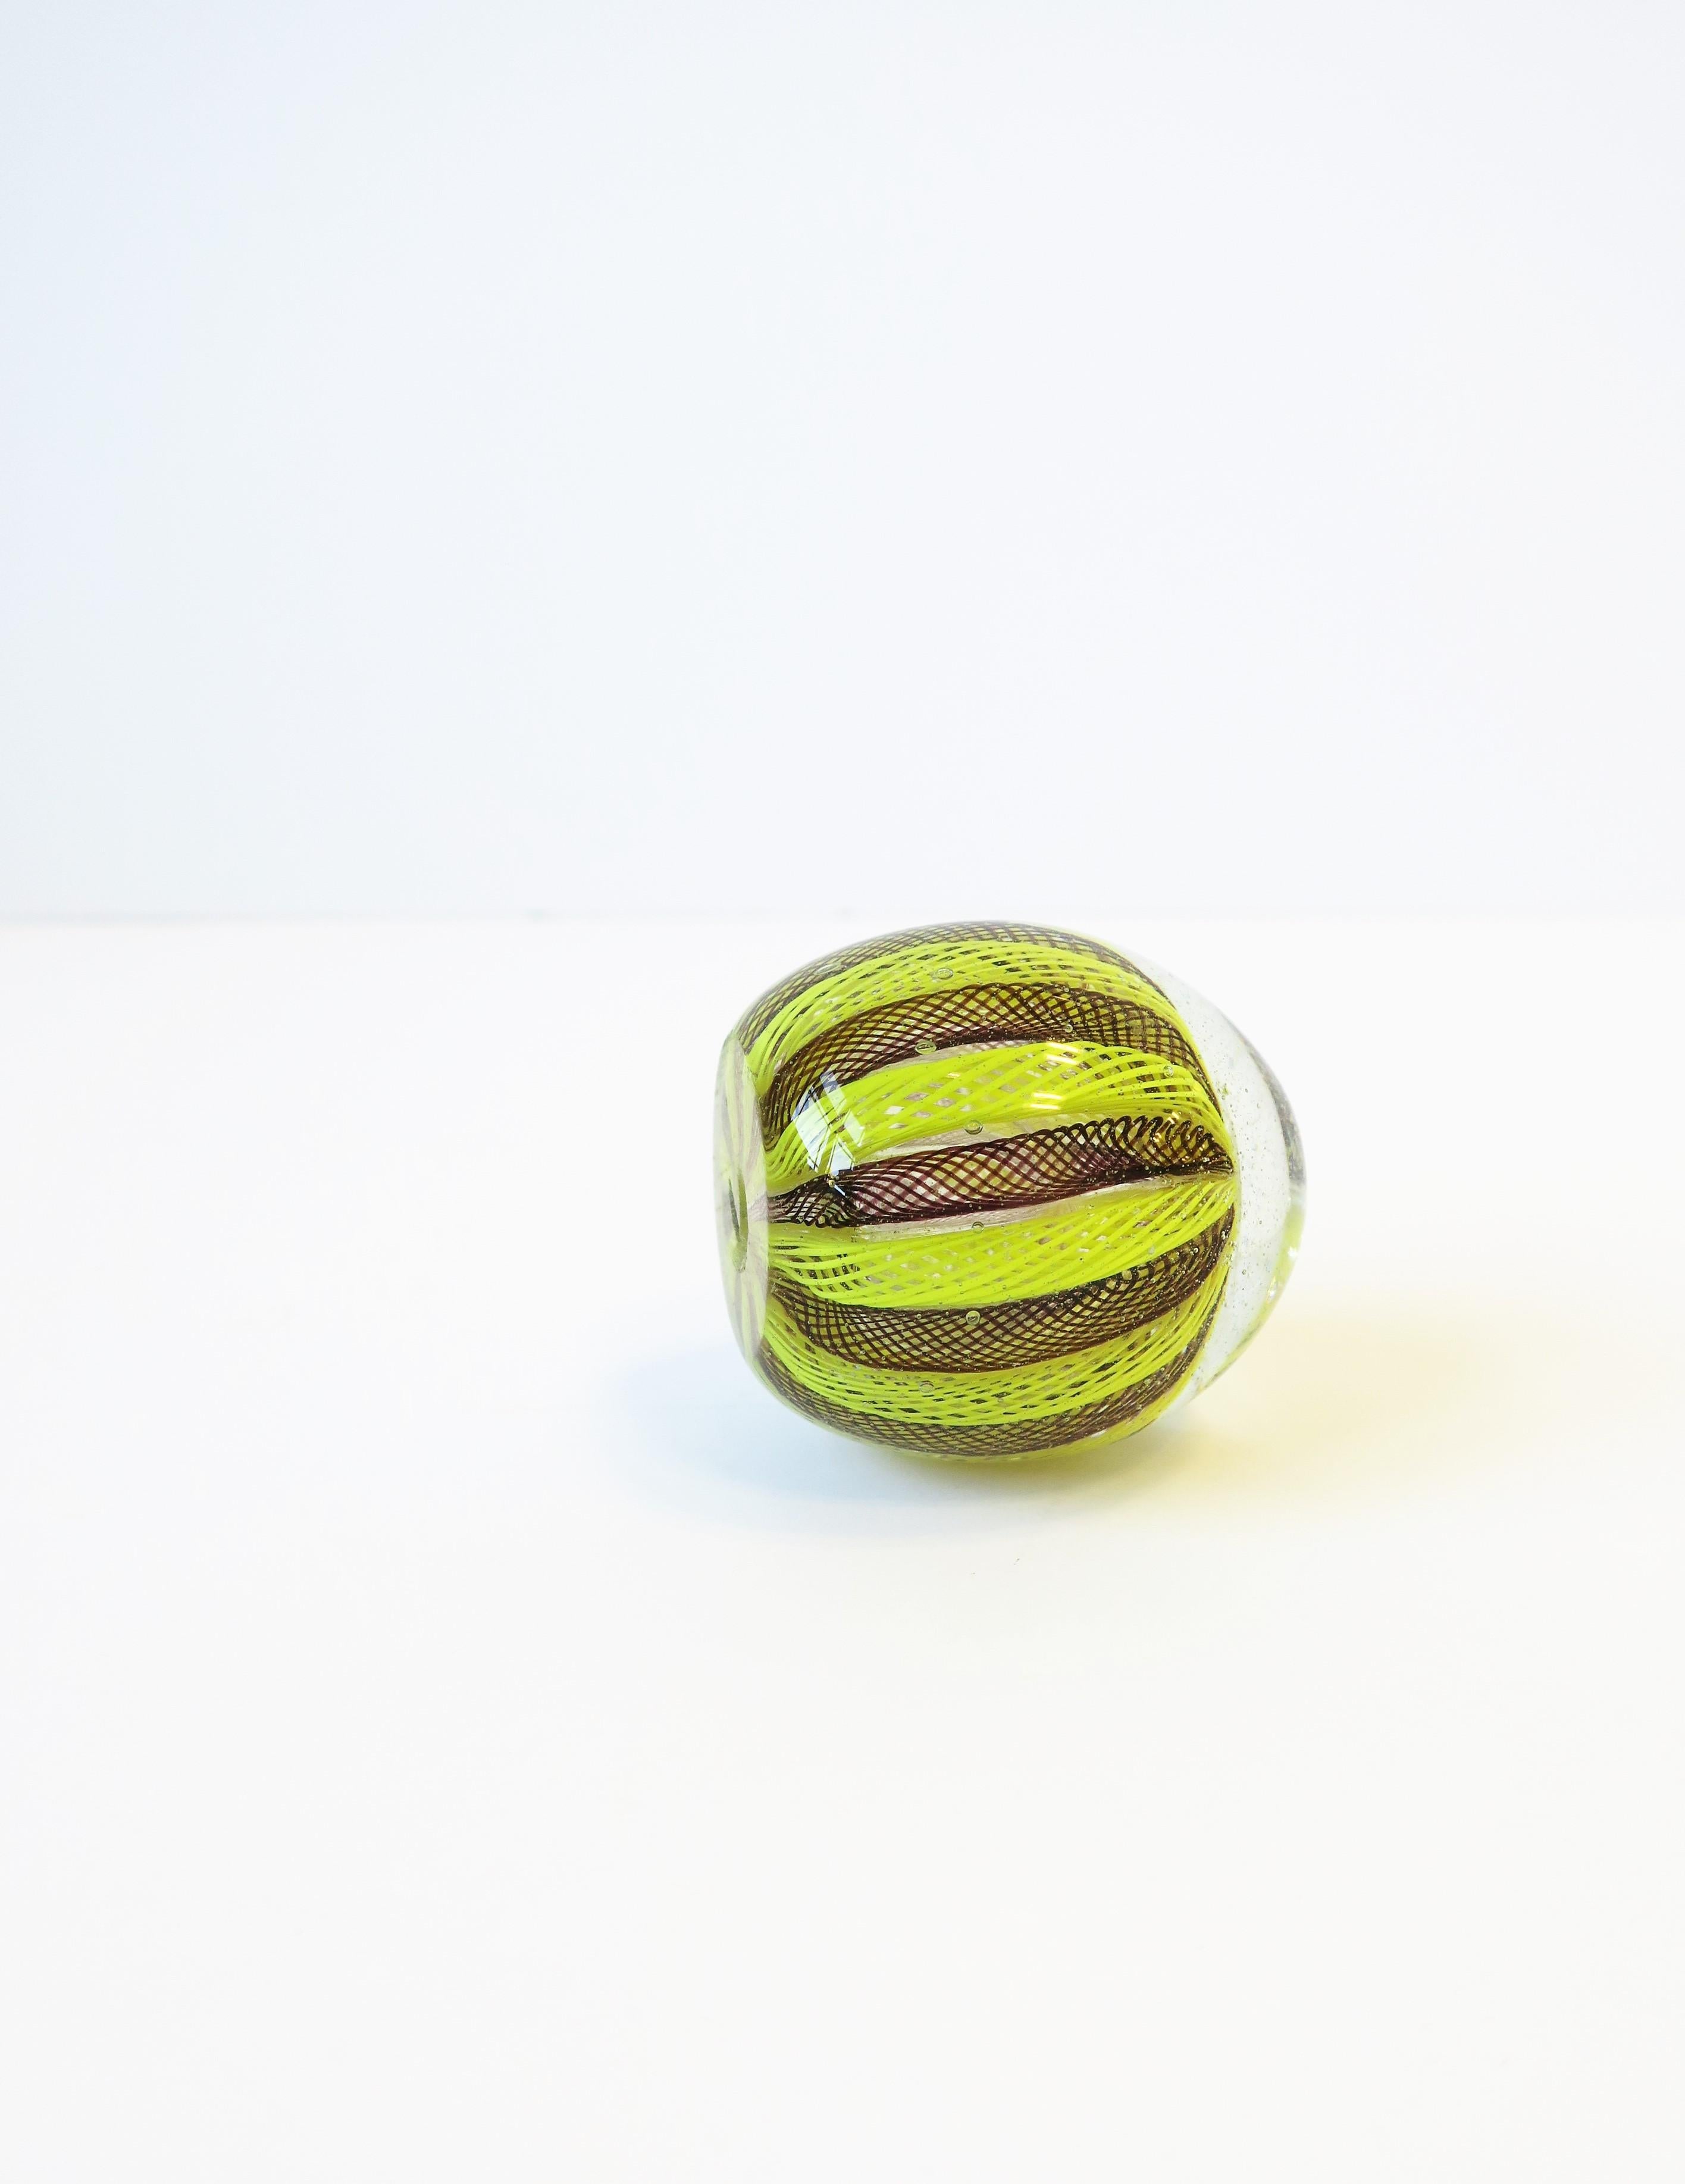 Hand-Crafted Italian Murano Art Glass Paperweight with Neon Yellow Ribbon Design after Seguso For Sale